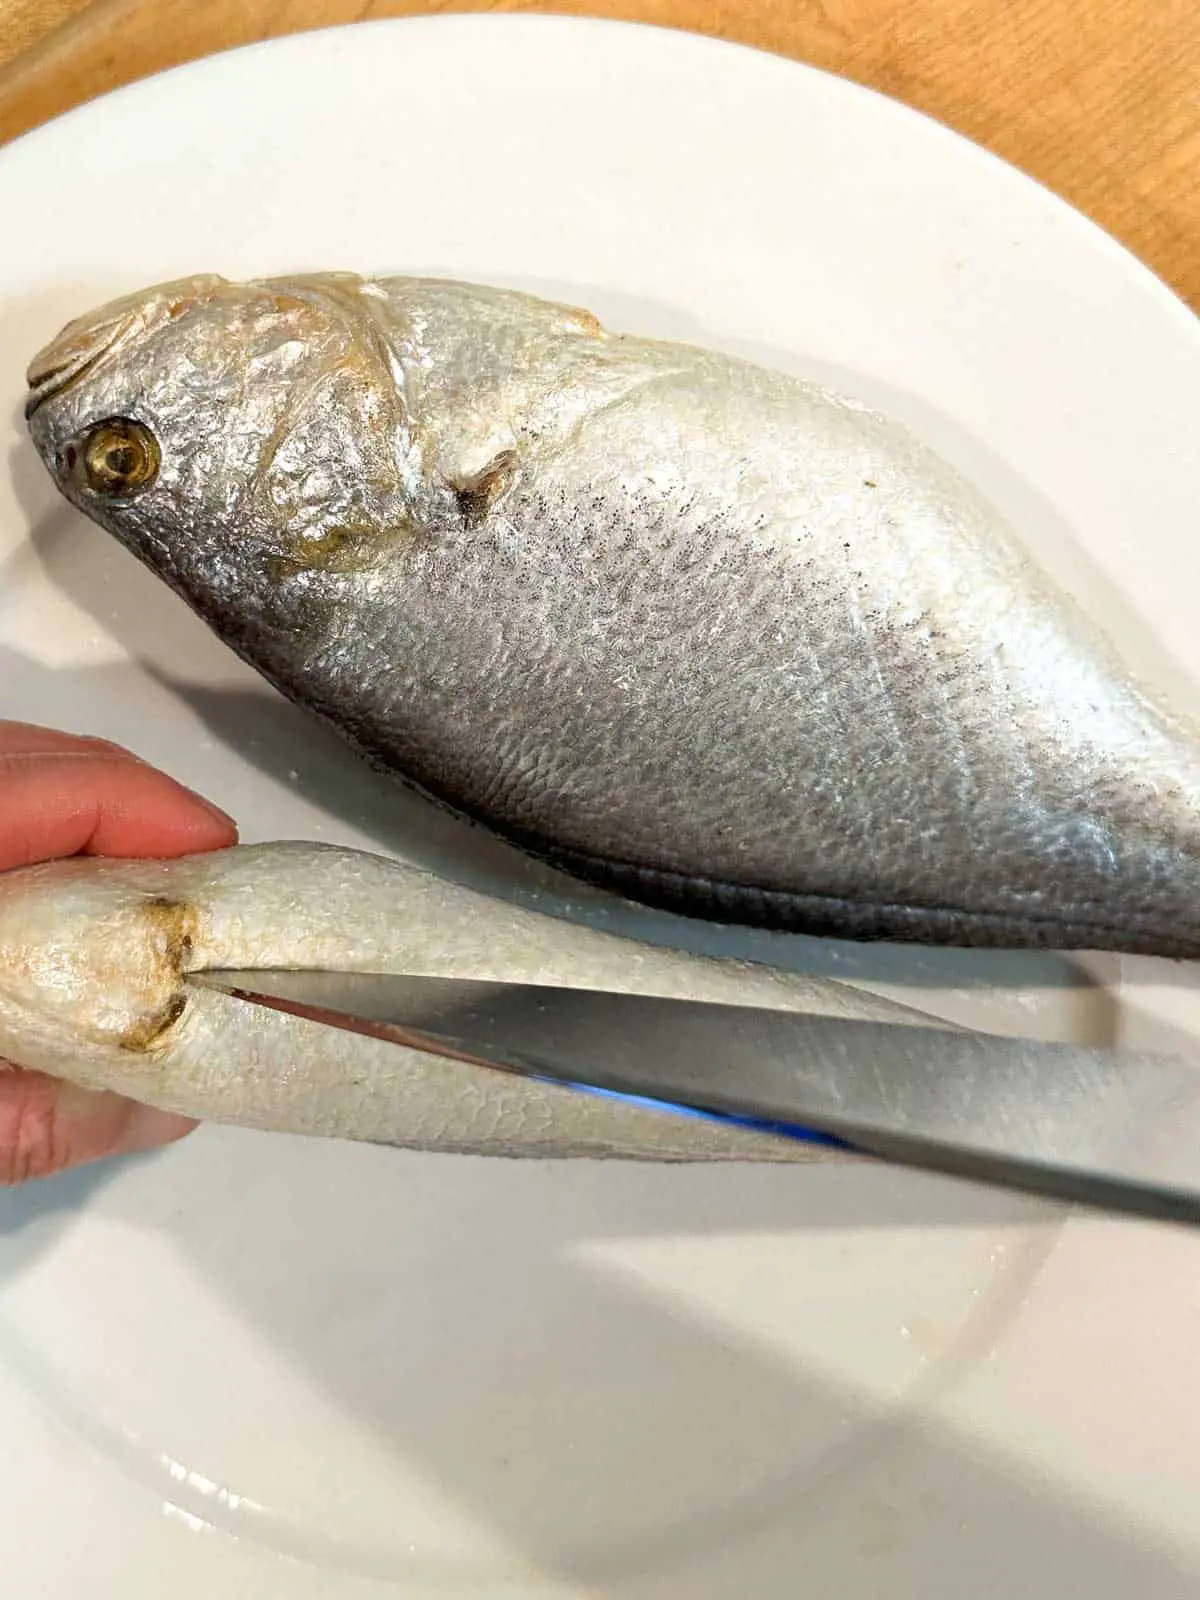 Two corvina fish on a white plate. Someone is holding one of the fish and has a knife poised over the fish ready to cut it open to clean out the insides.